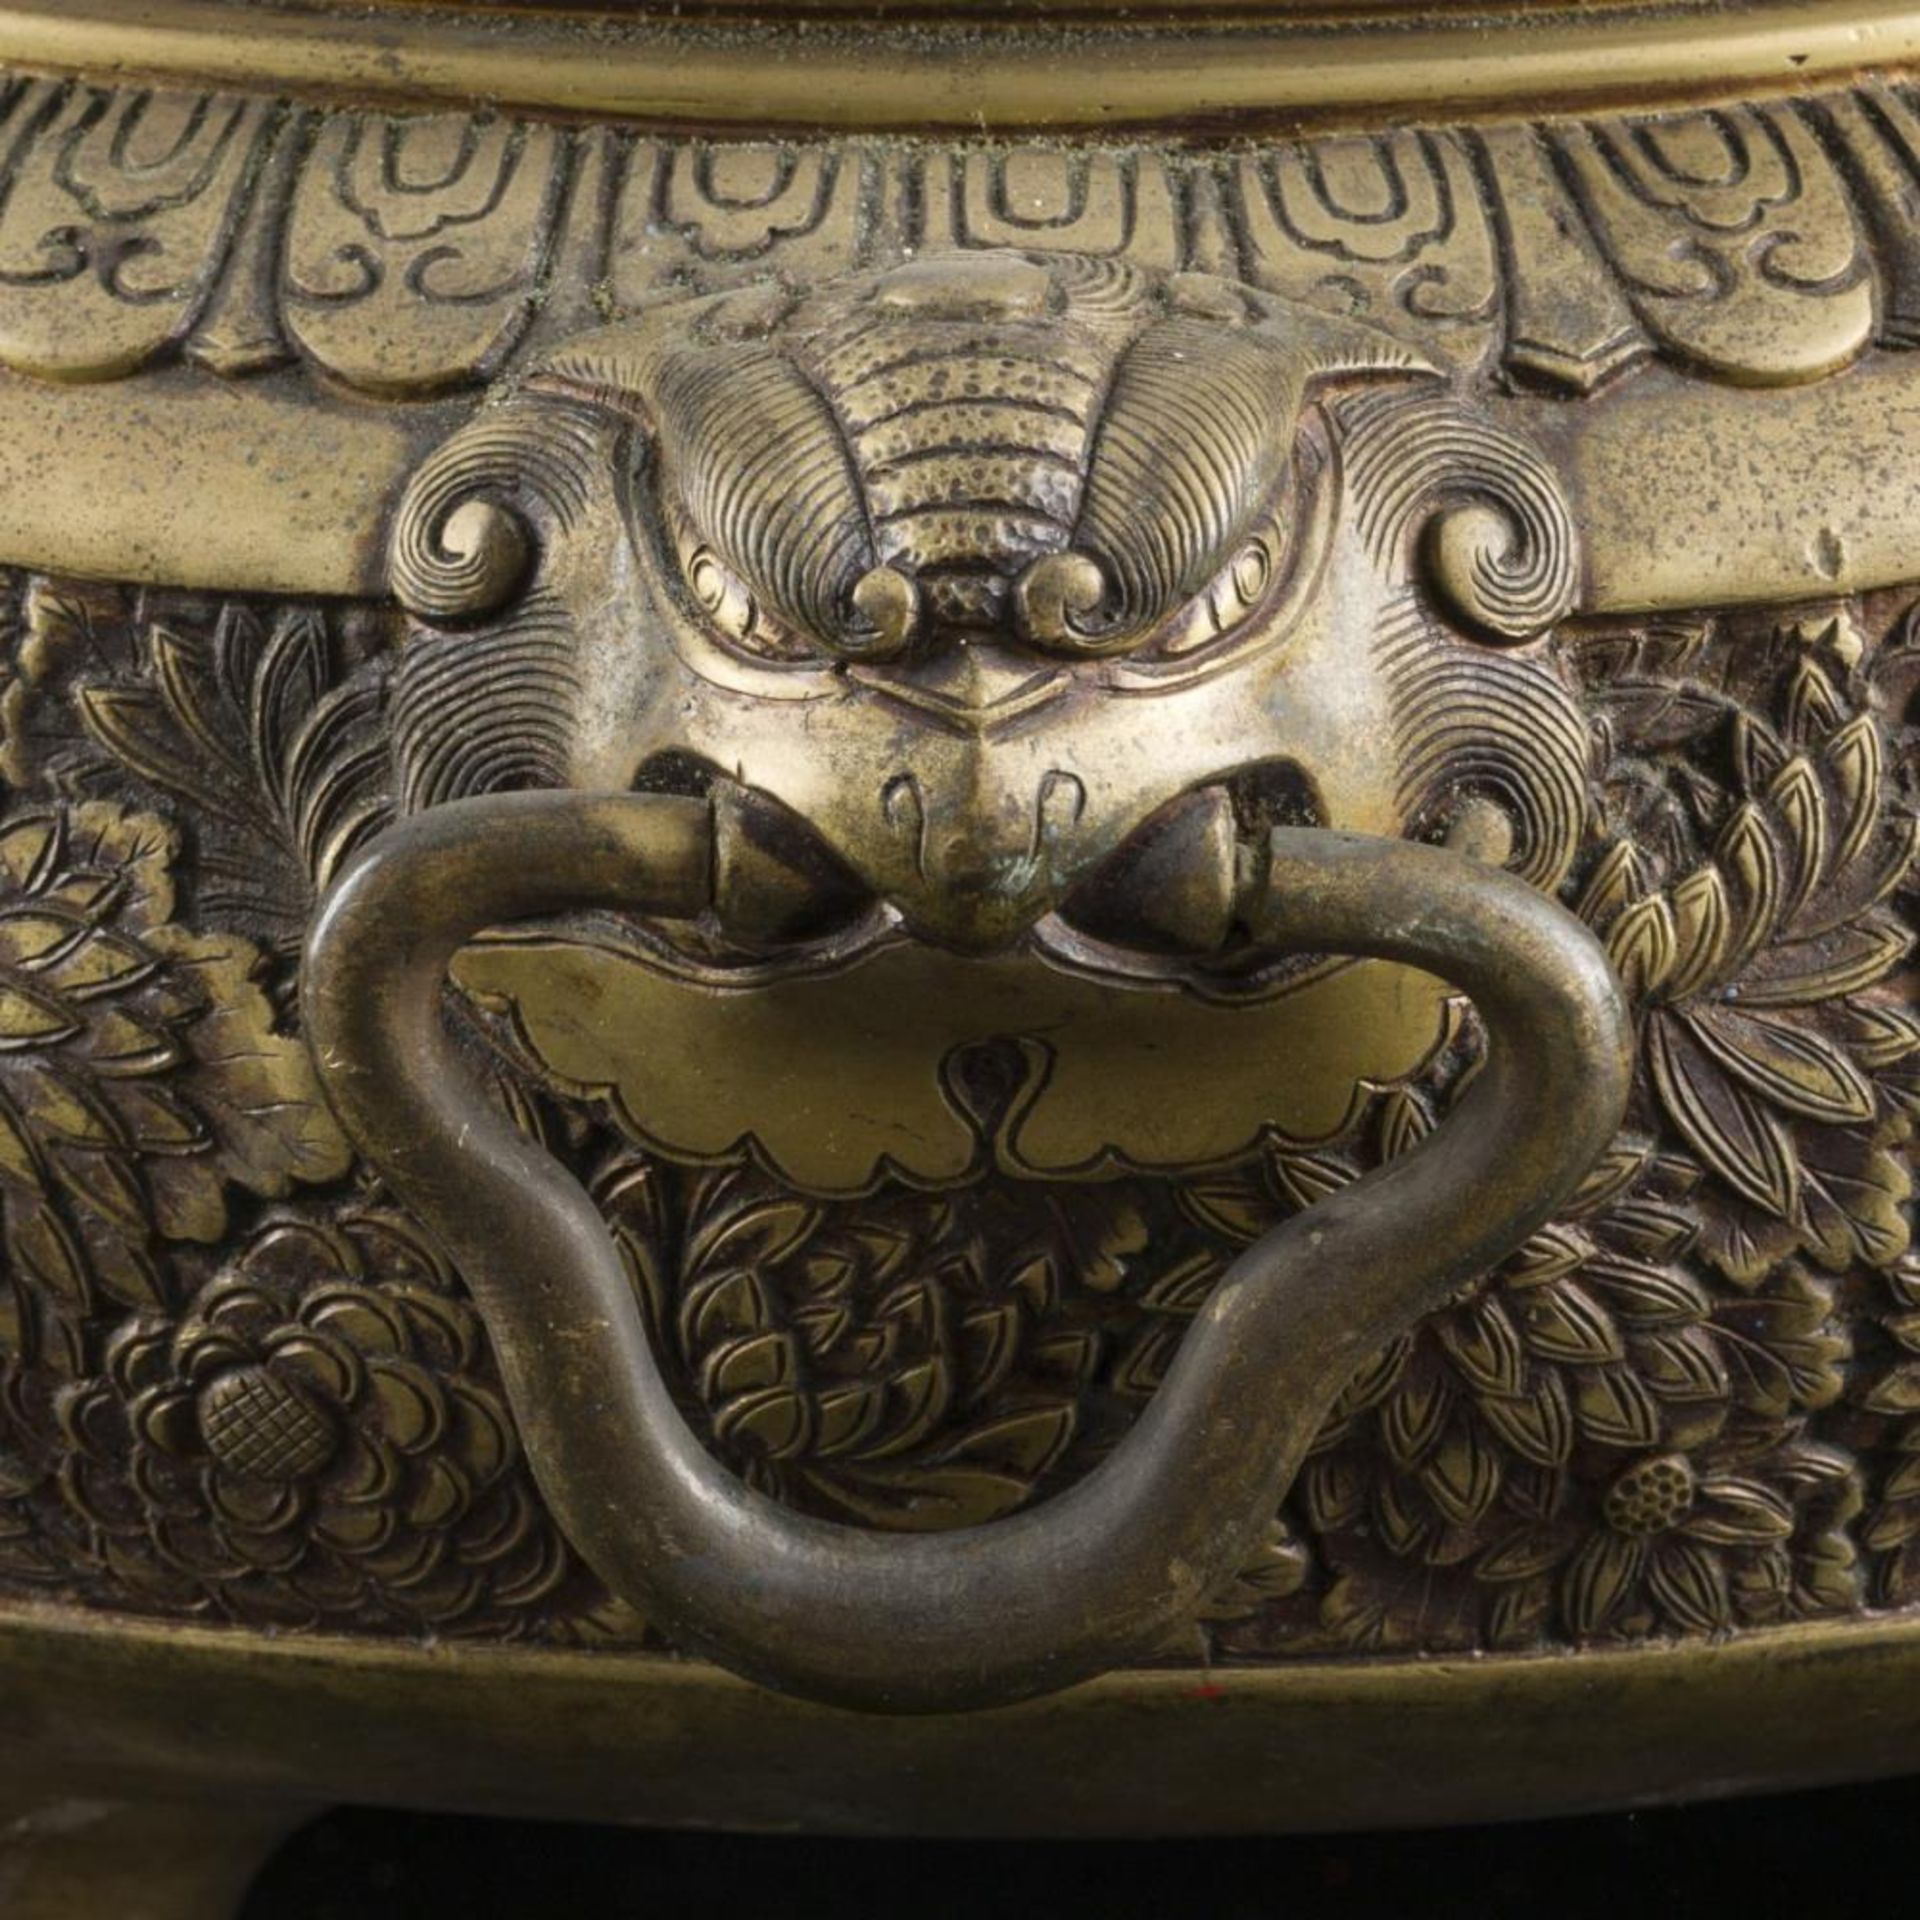 A bronze part of an incence burner, Koro, China, 20th century. - Image 2 of 5